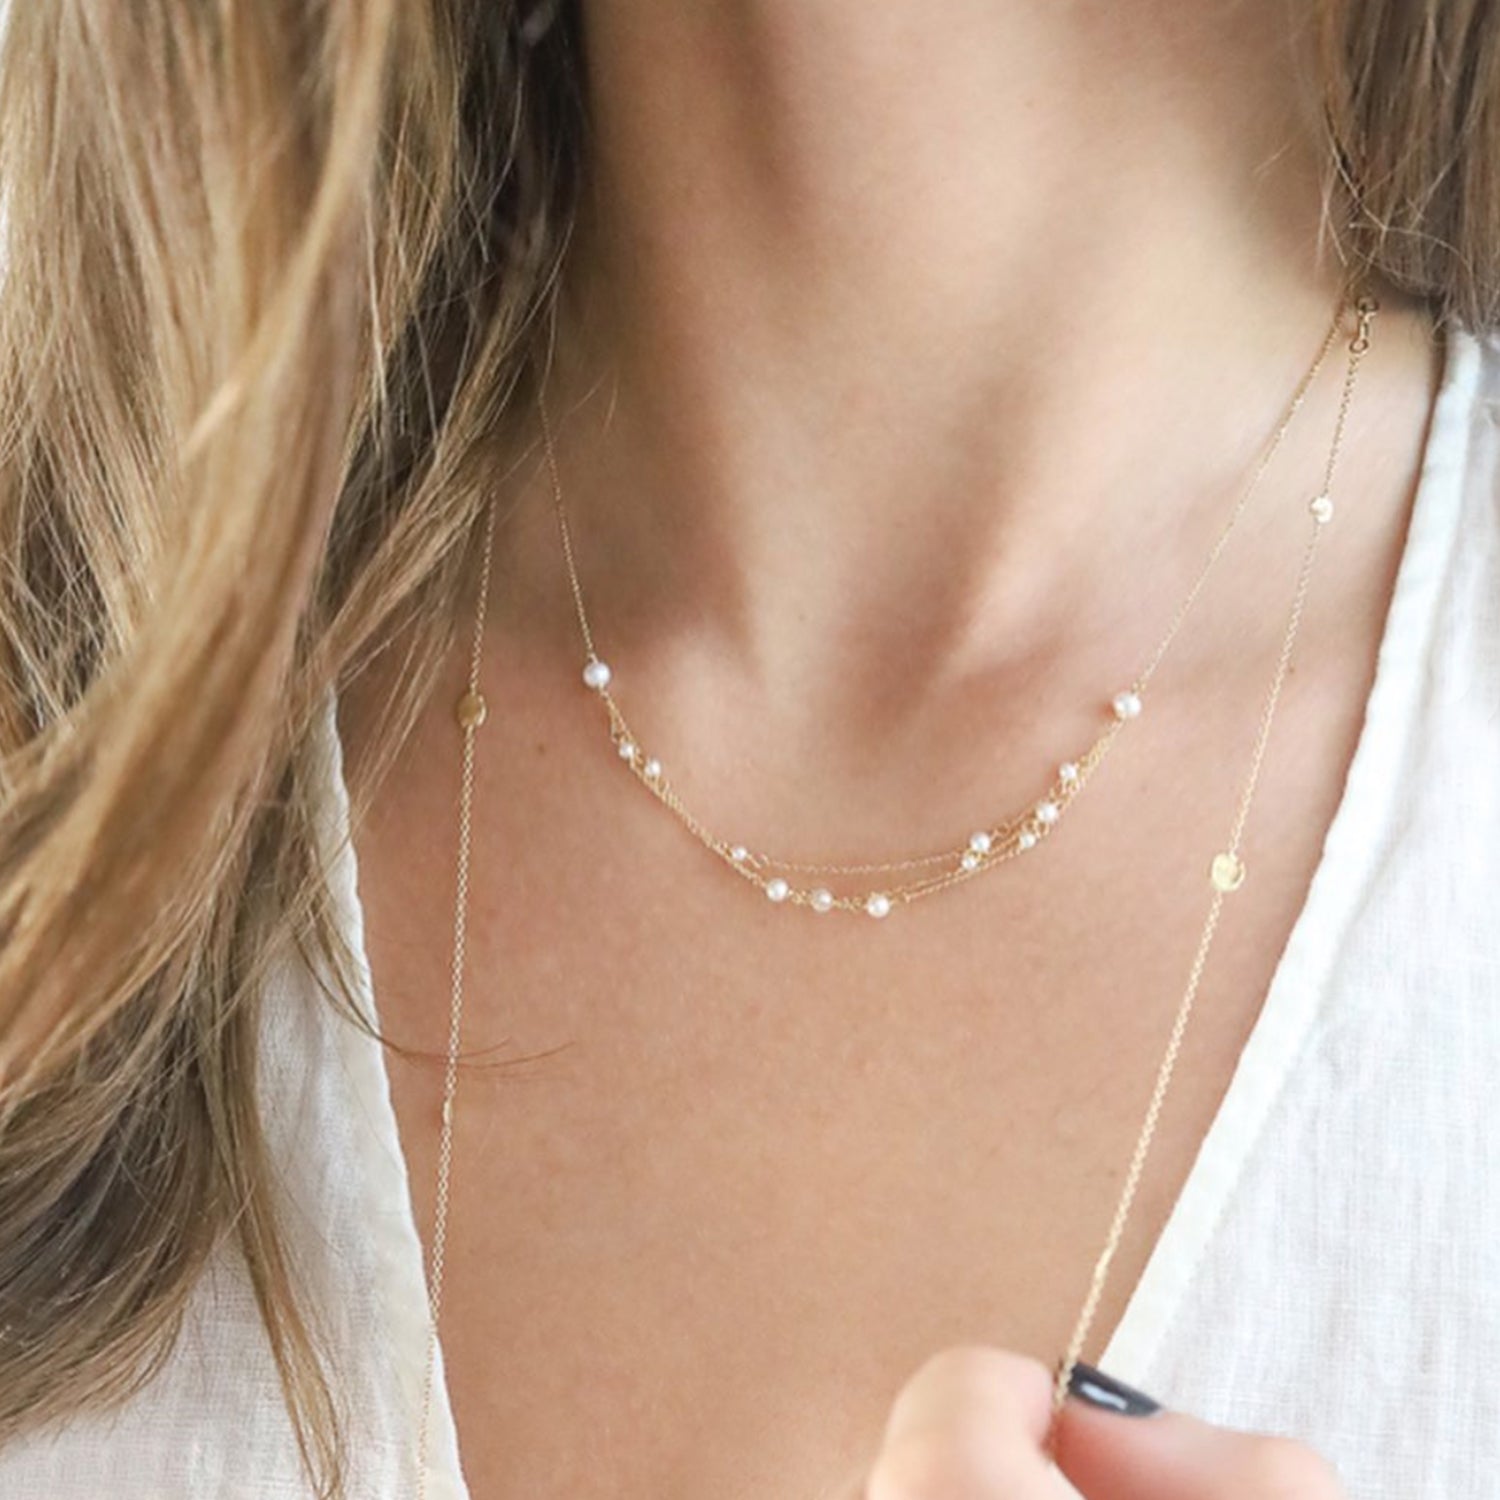 18ct yellow gold fine chain necklace with 3 strand layered sections with fresh water pearls